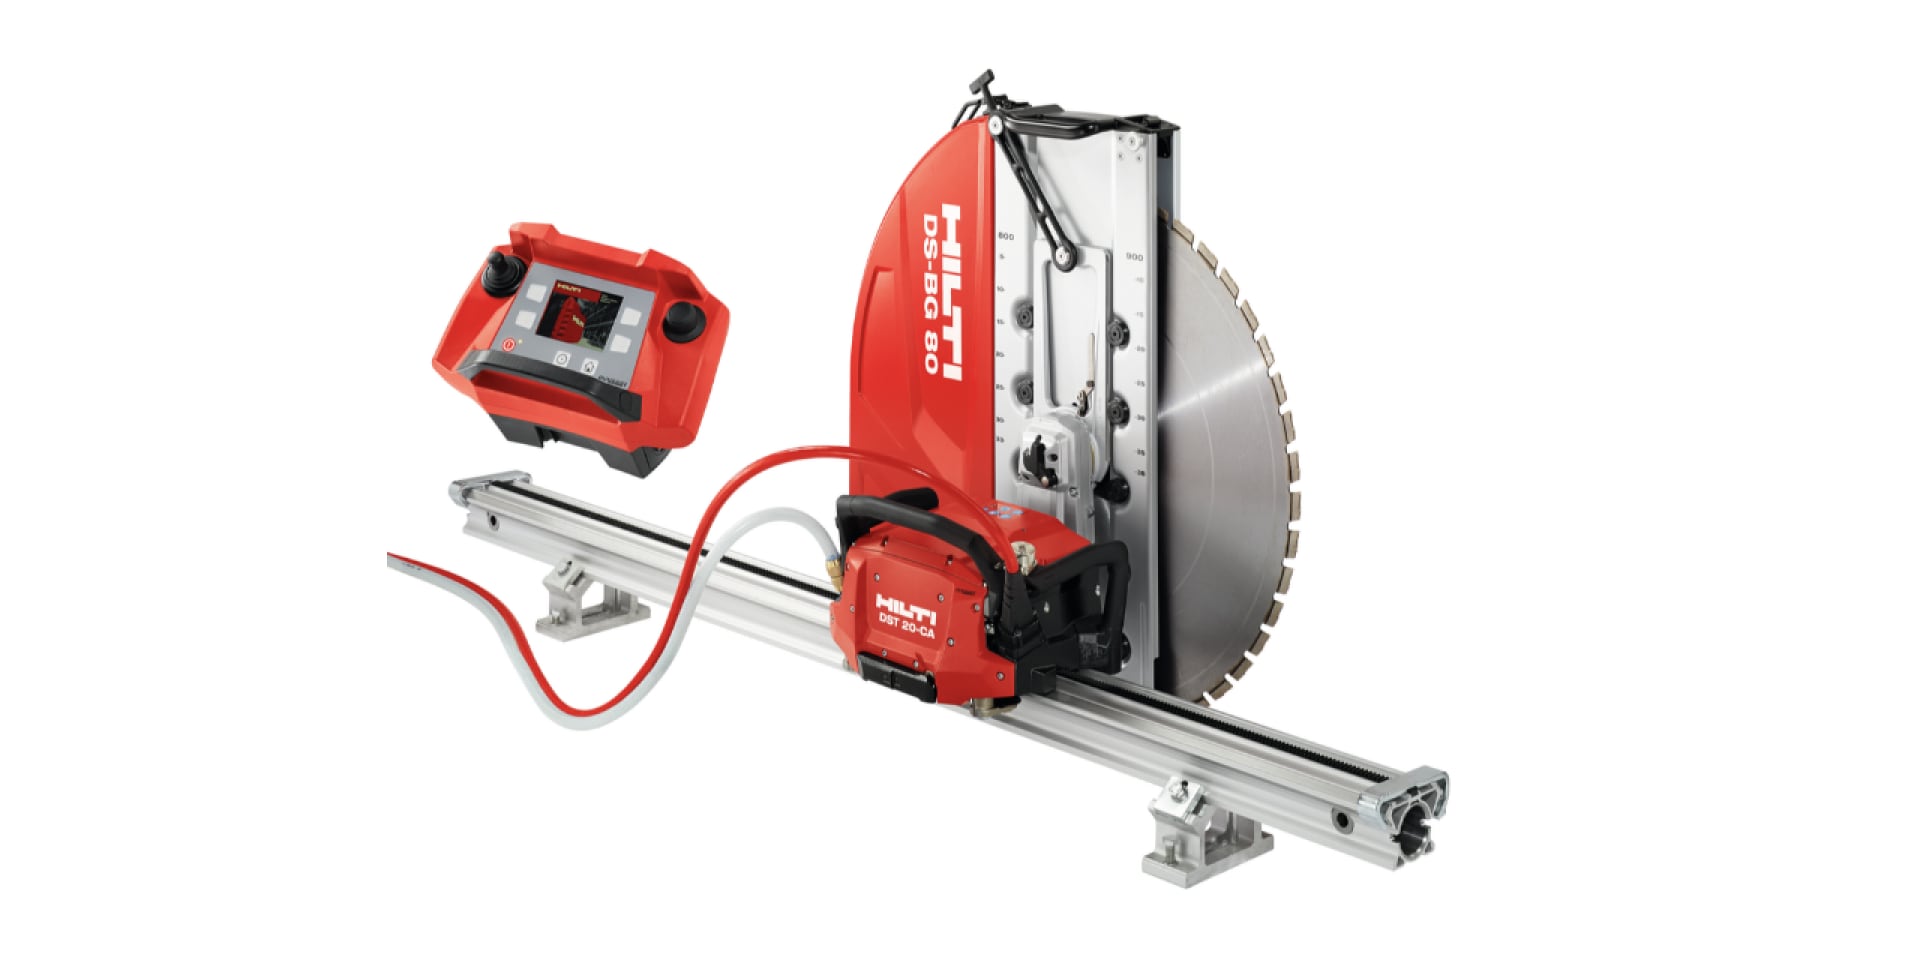 DST 20-CA WALL SAW